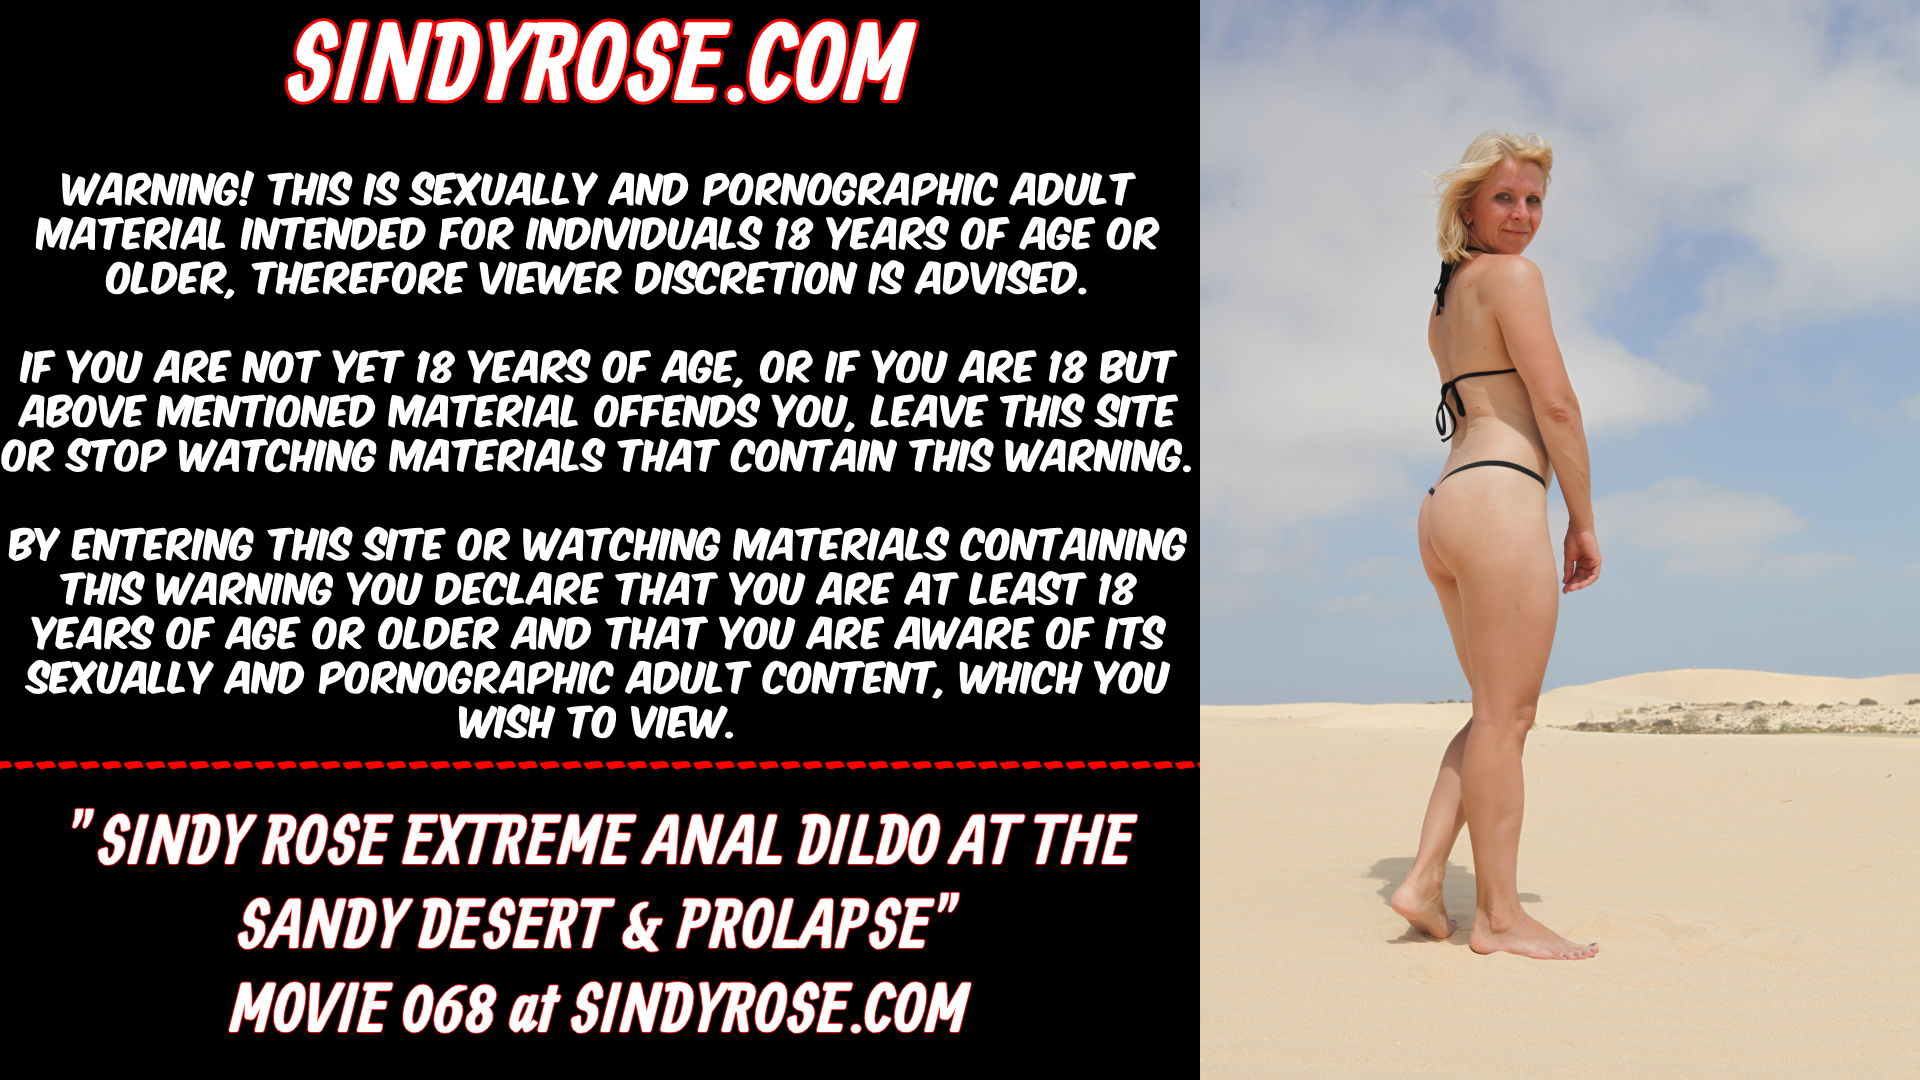 Sindy Rose extreme anal dildo at the s... desert & prolapse